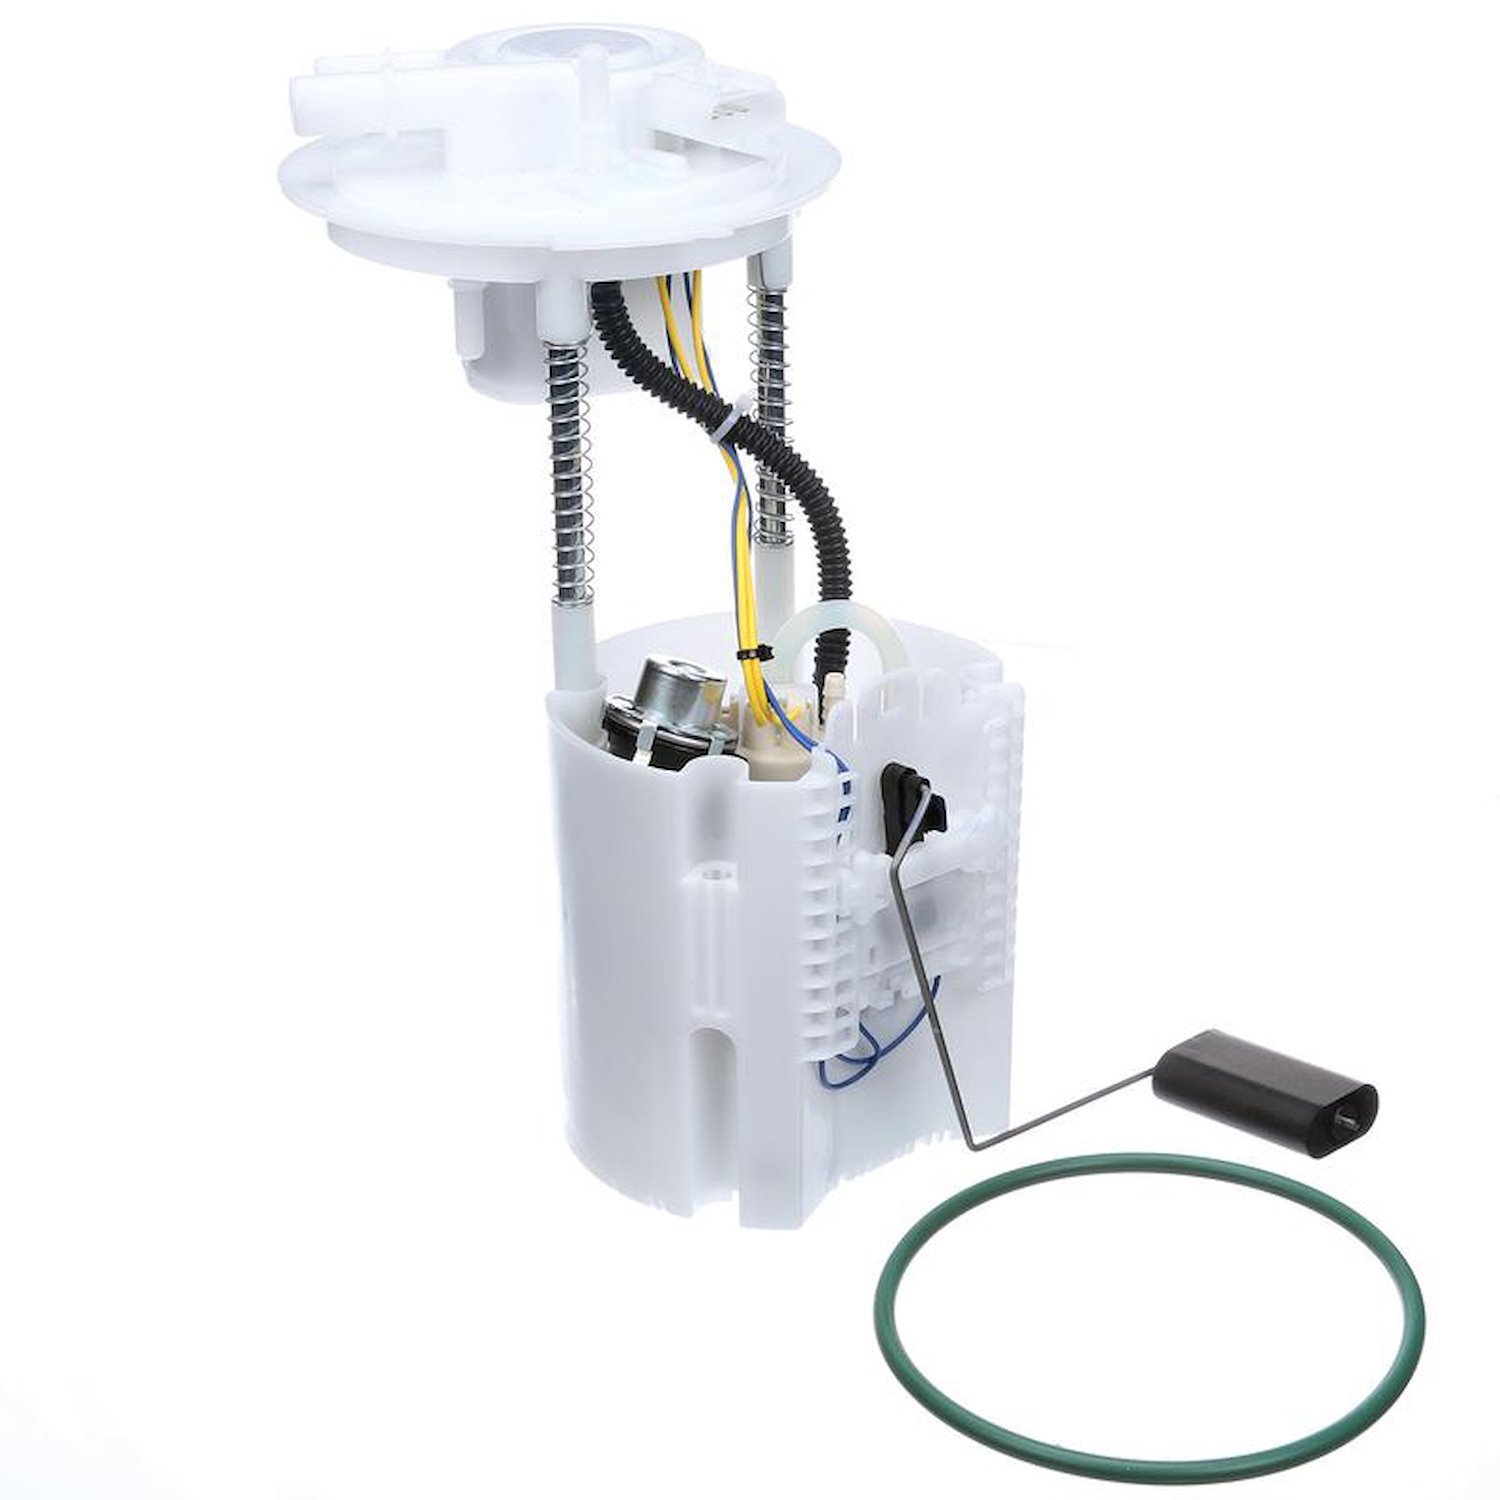 OE Chrysler/Dodge/Jeep Replacement Fuel Pump Module Assembly for 2014-2018 Jeep Cherokee/2015-2017 Chrysler 200